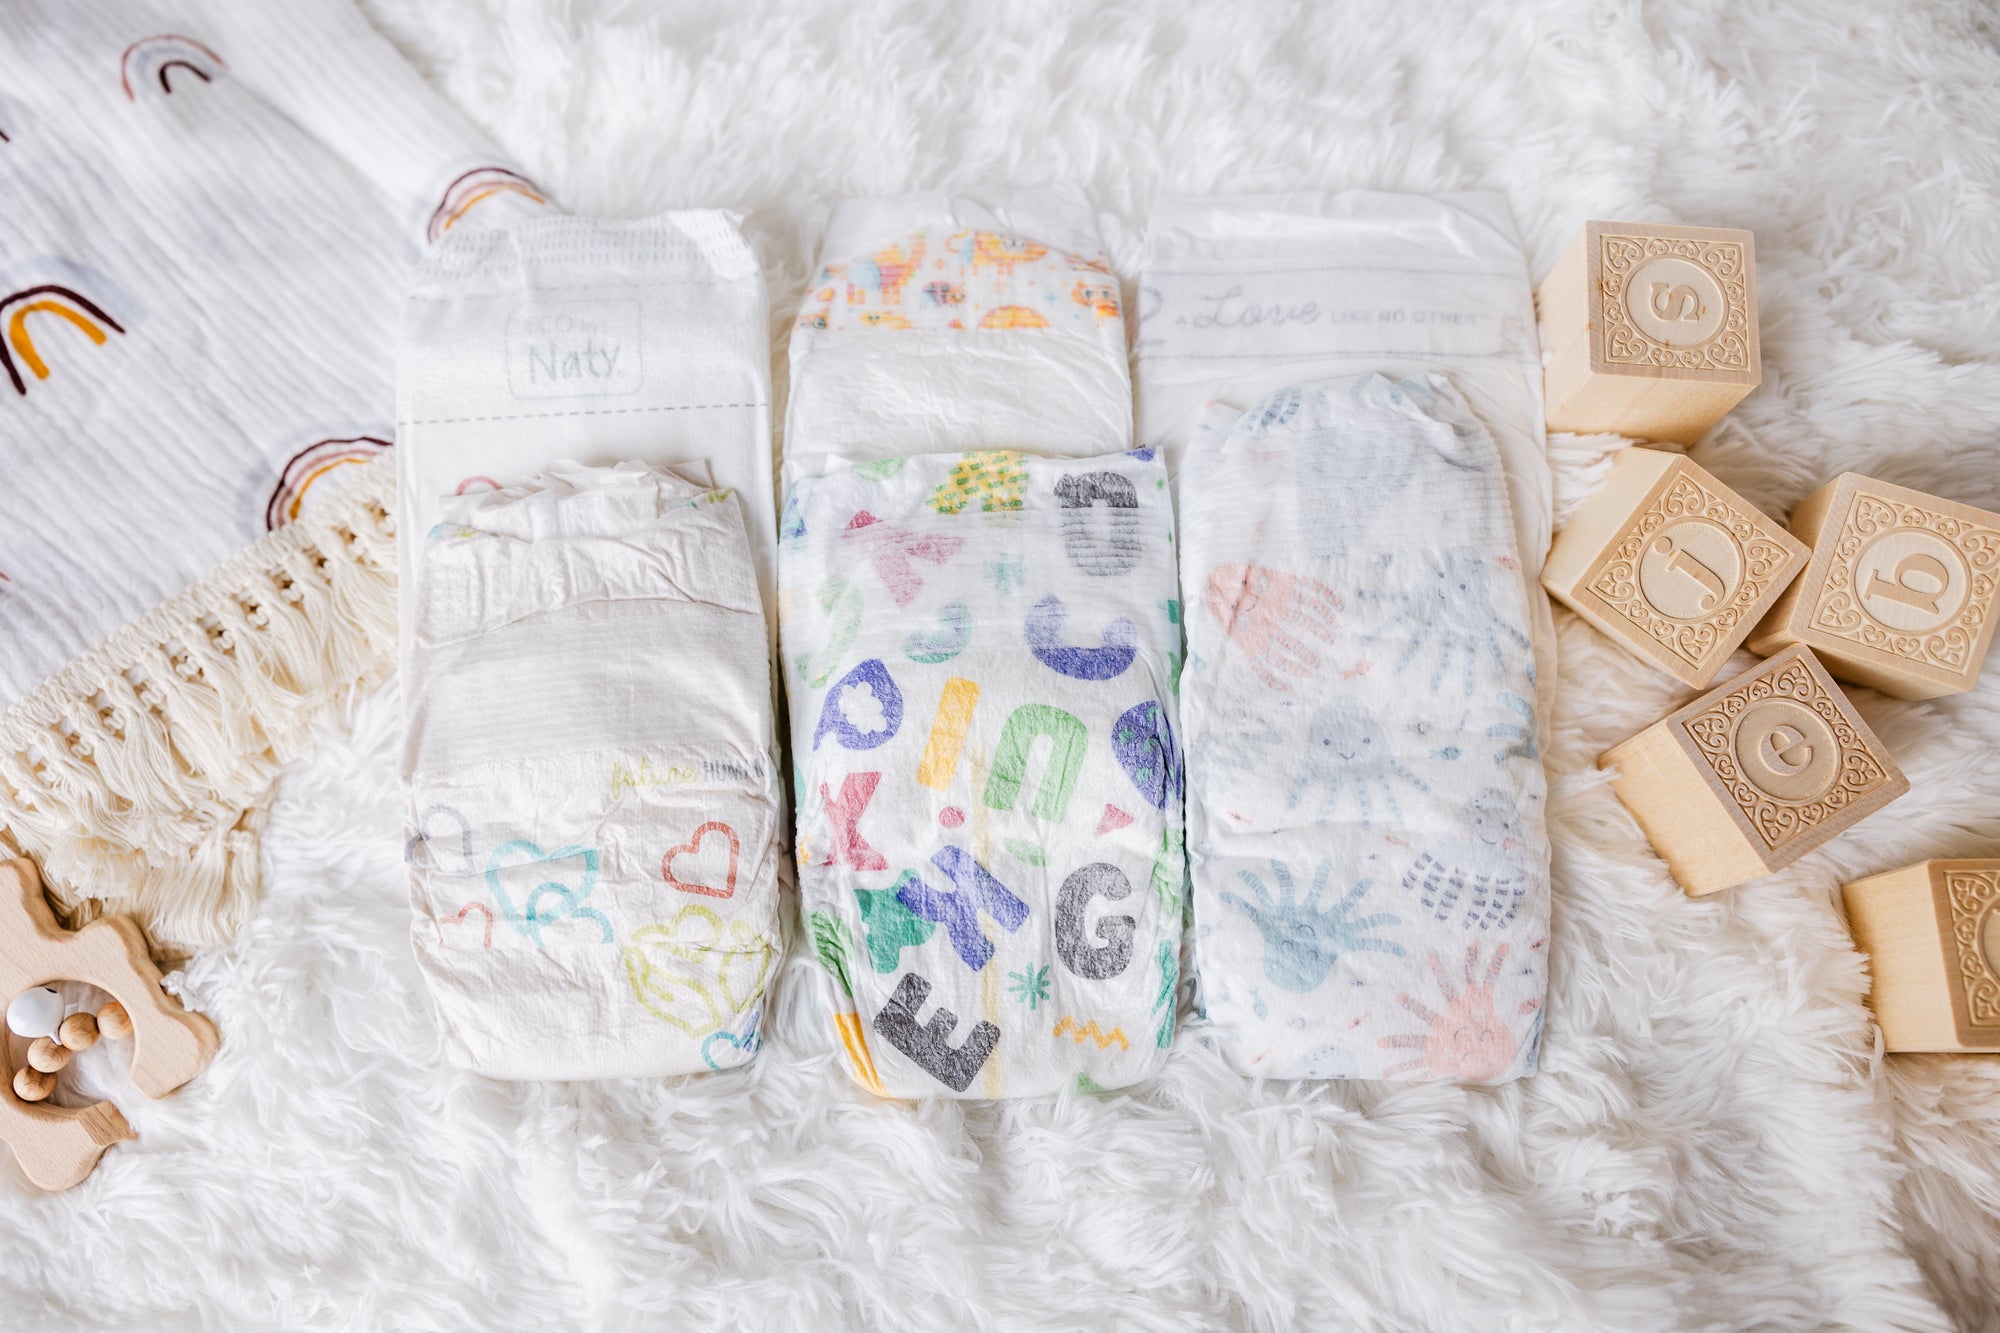 Mother Earth Diaper Sampler Package: 6 Diaper Sample Packs of size 1 eco-friendly diapers including ECO by Naty, Seventh Generation, Babyganics, Hello Bello, Bambo Nature and ABBY&FINN